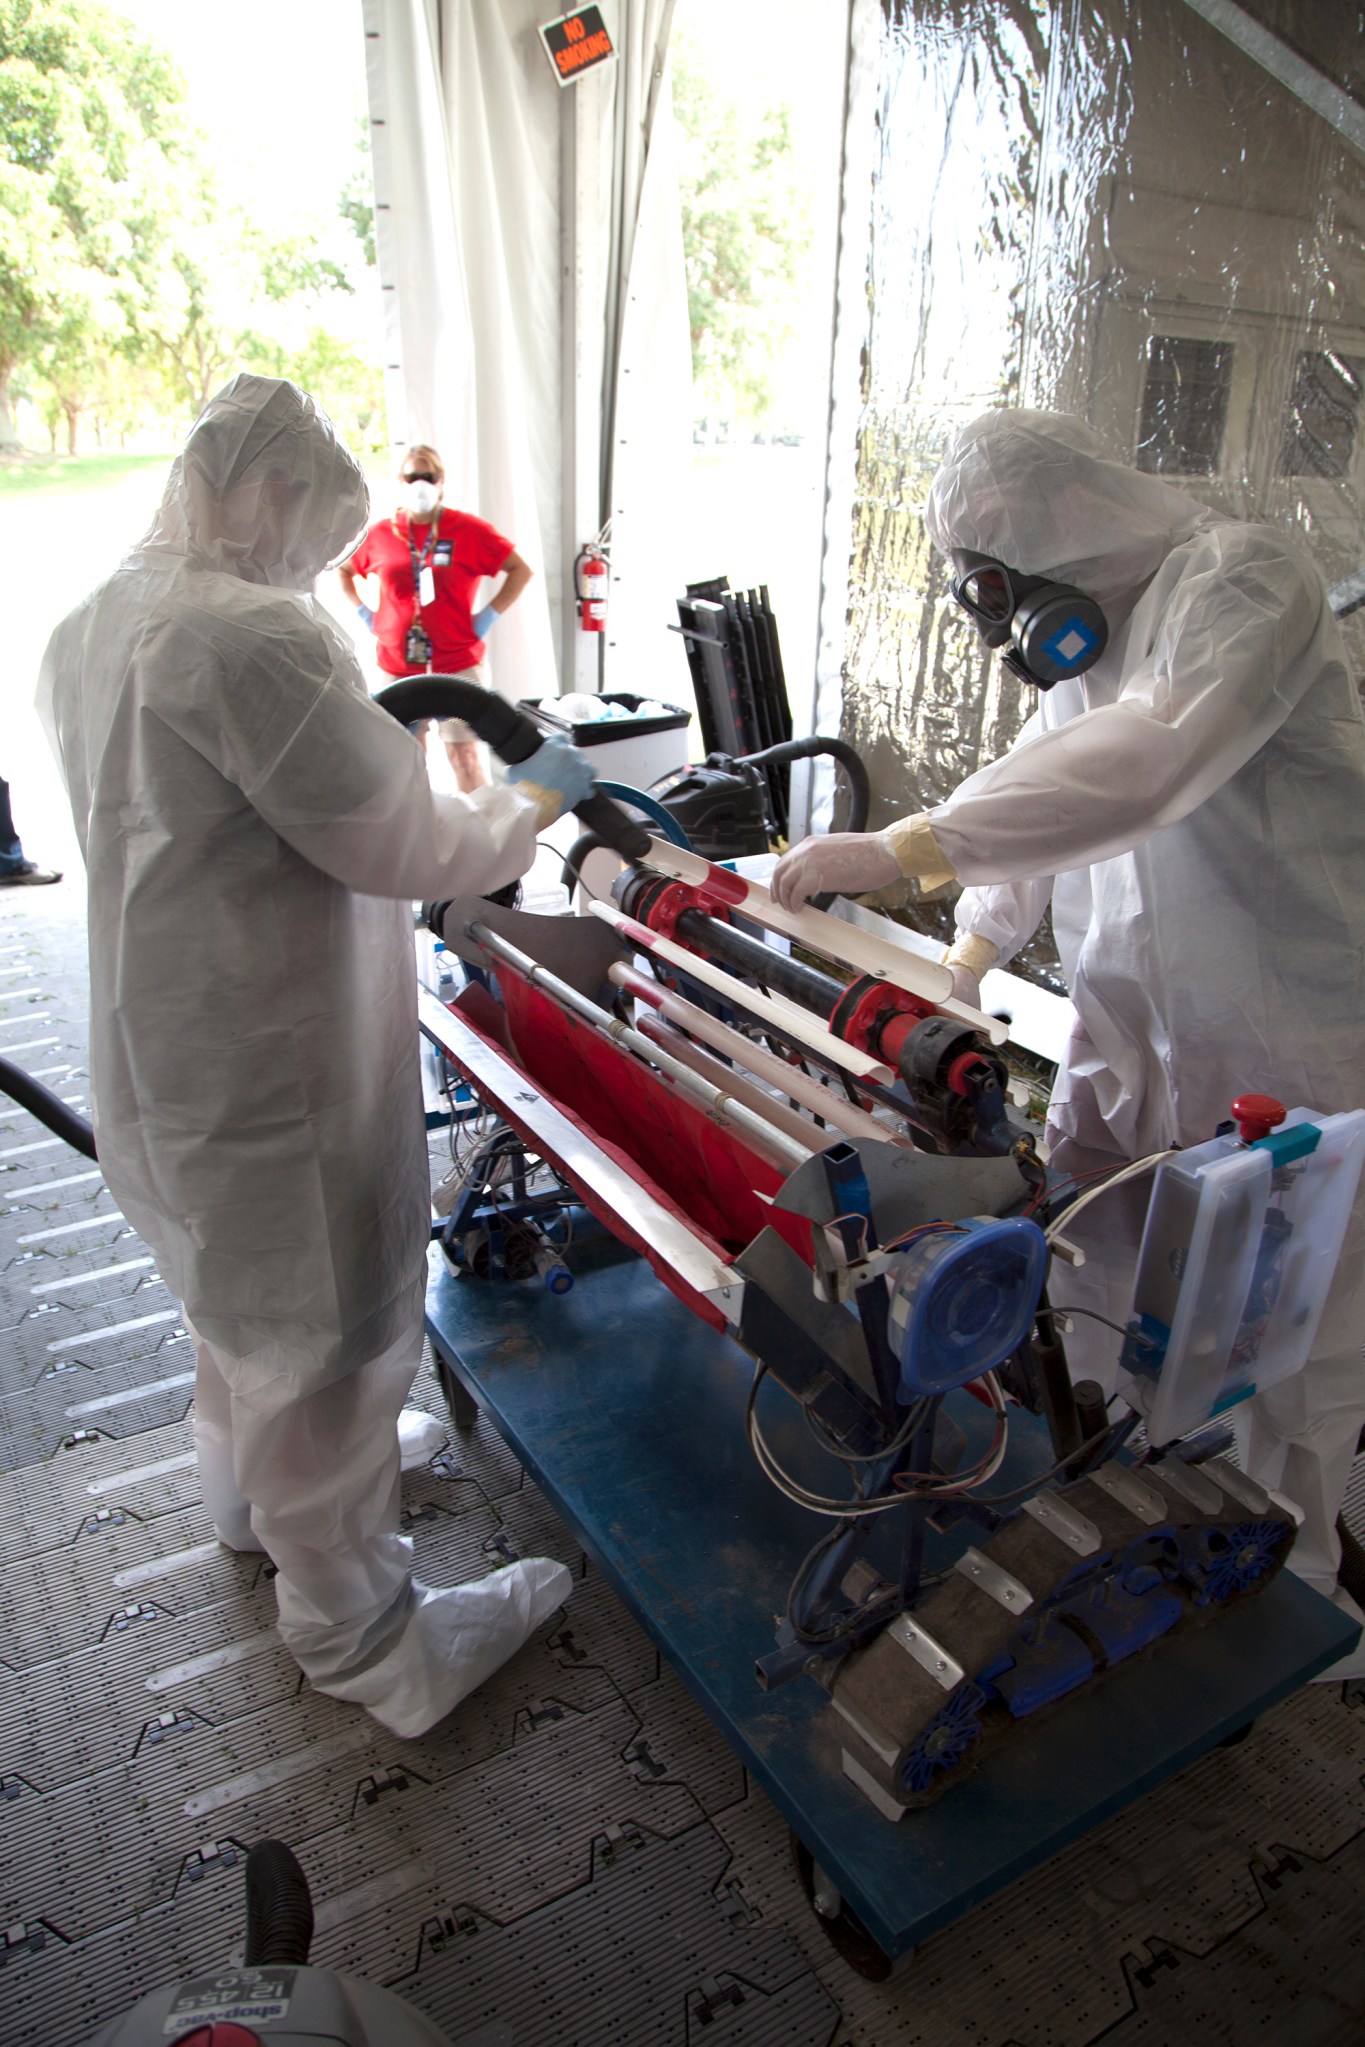 Participants clean their robotic excavator following a practice round in the regolith bin.